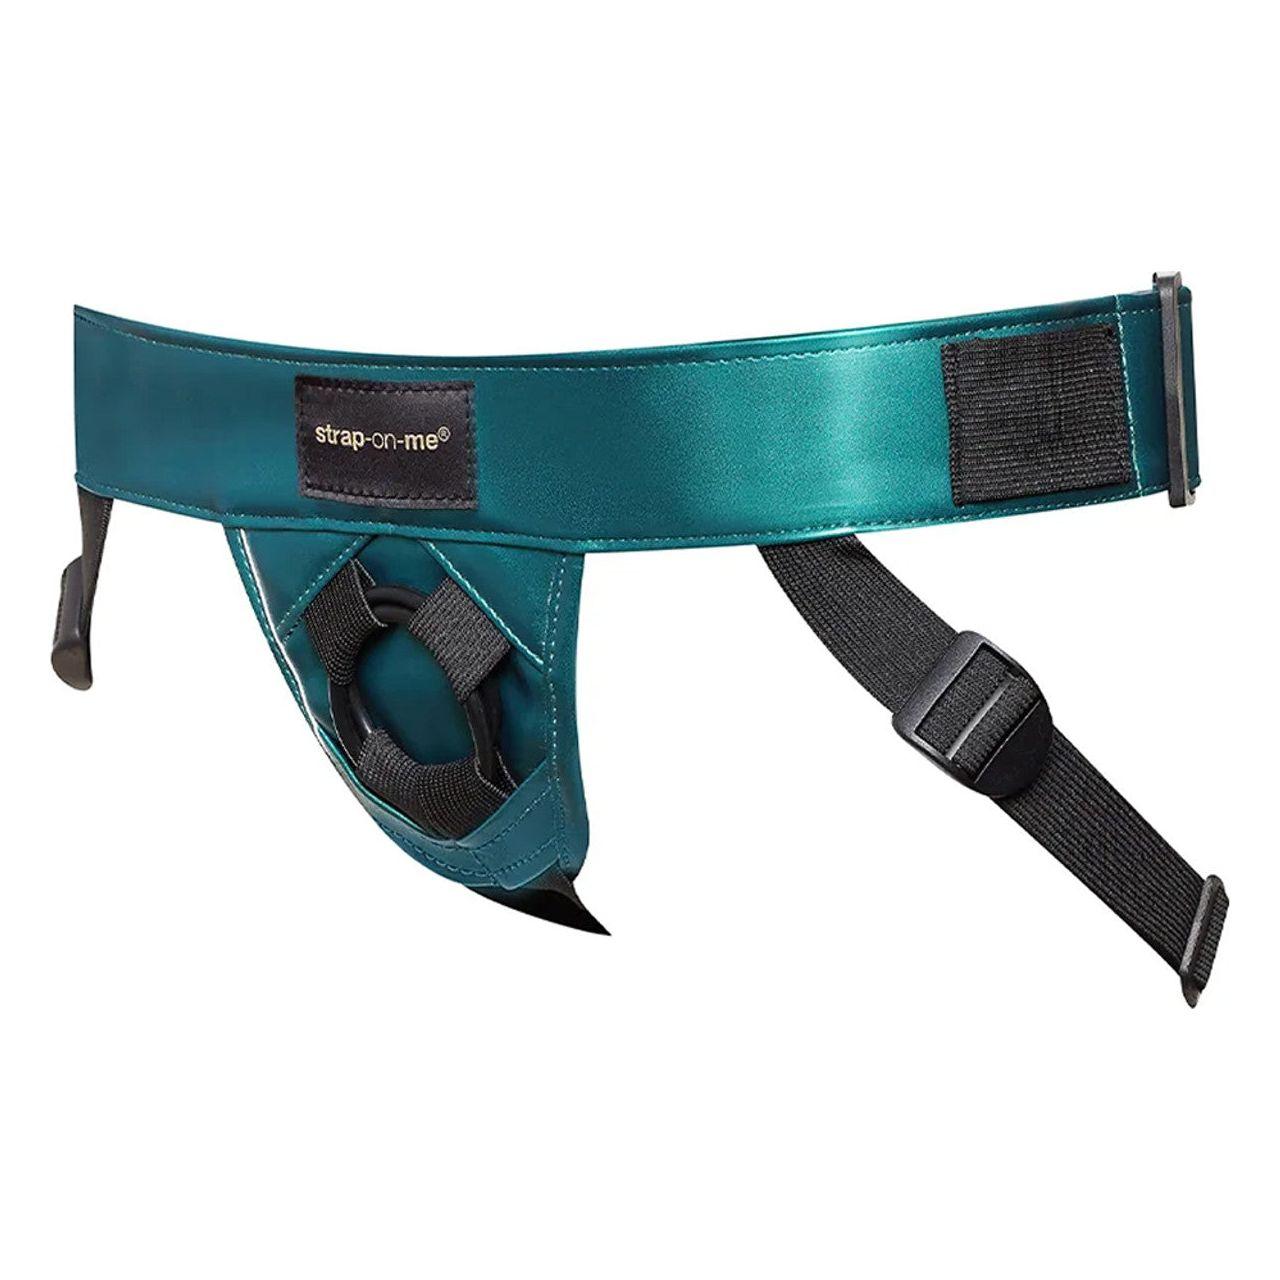 Strap-On-Me Curious Leatherette Harness - Metallic Green - shop enby